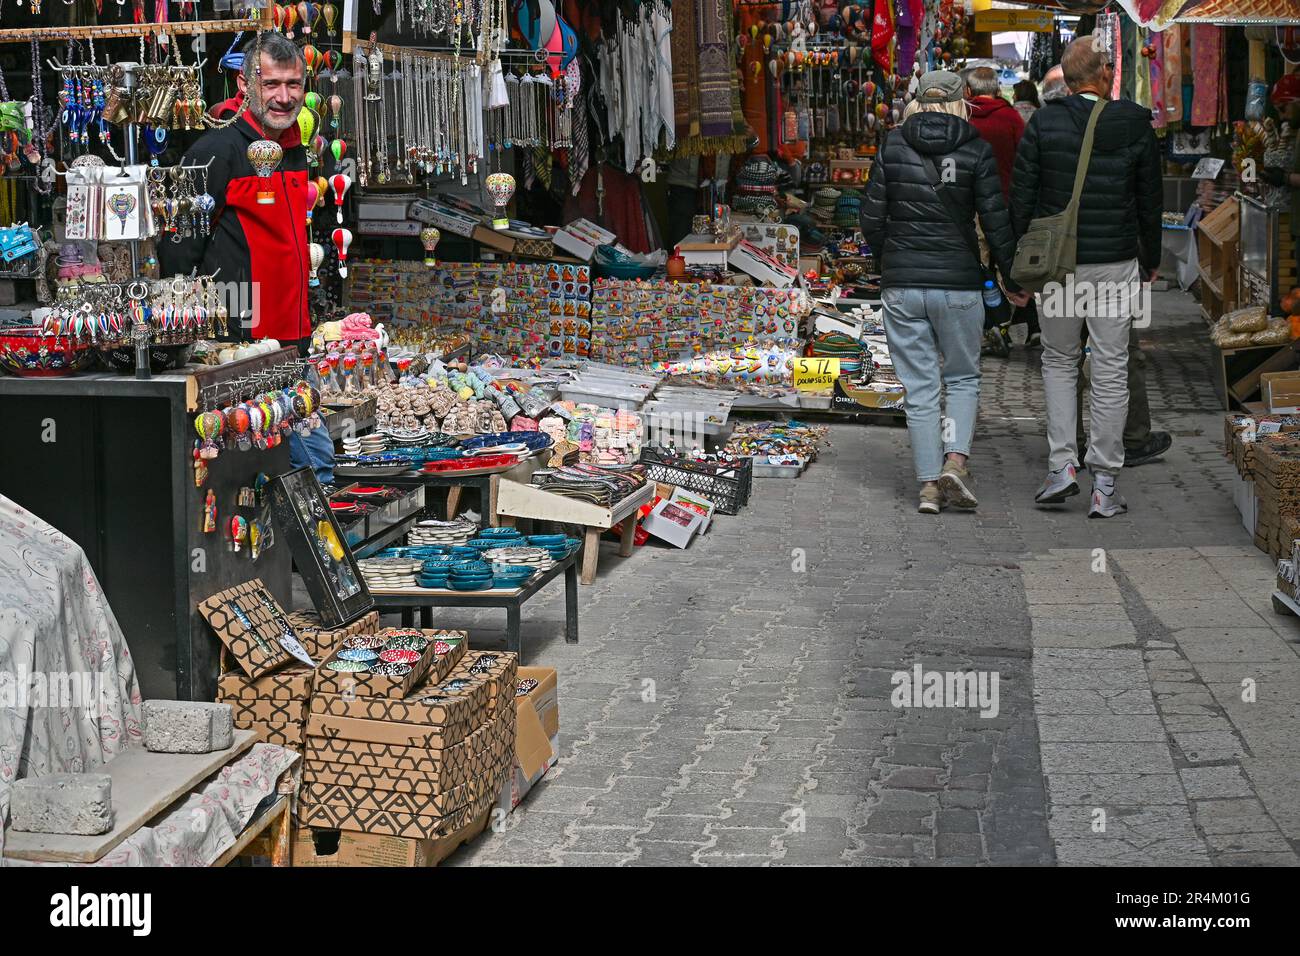 A tour group walks past souvenir shops and food stalls along the approach to the Goreme Open-Air Museum, Turkey. Stock Photo